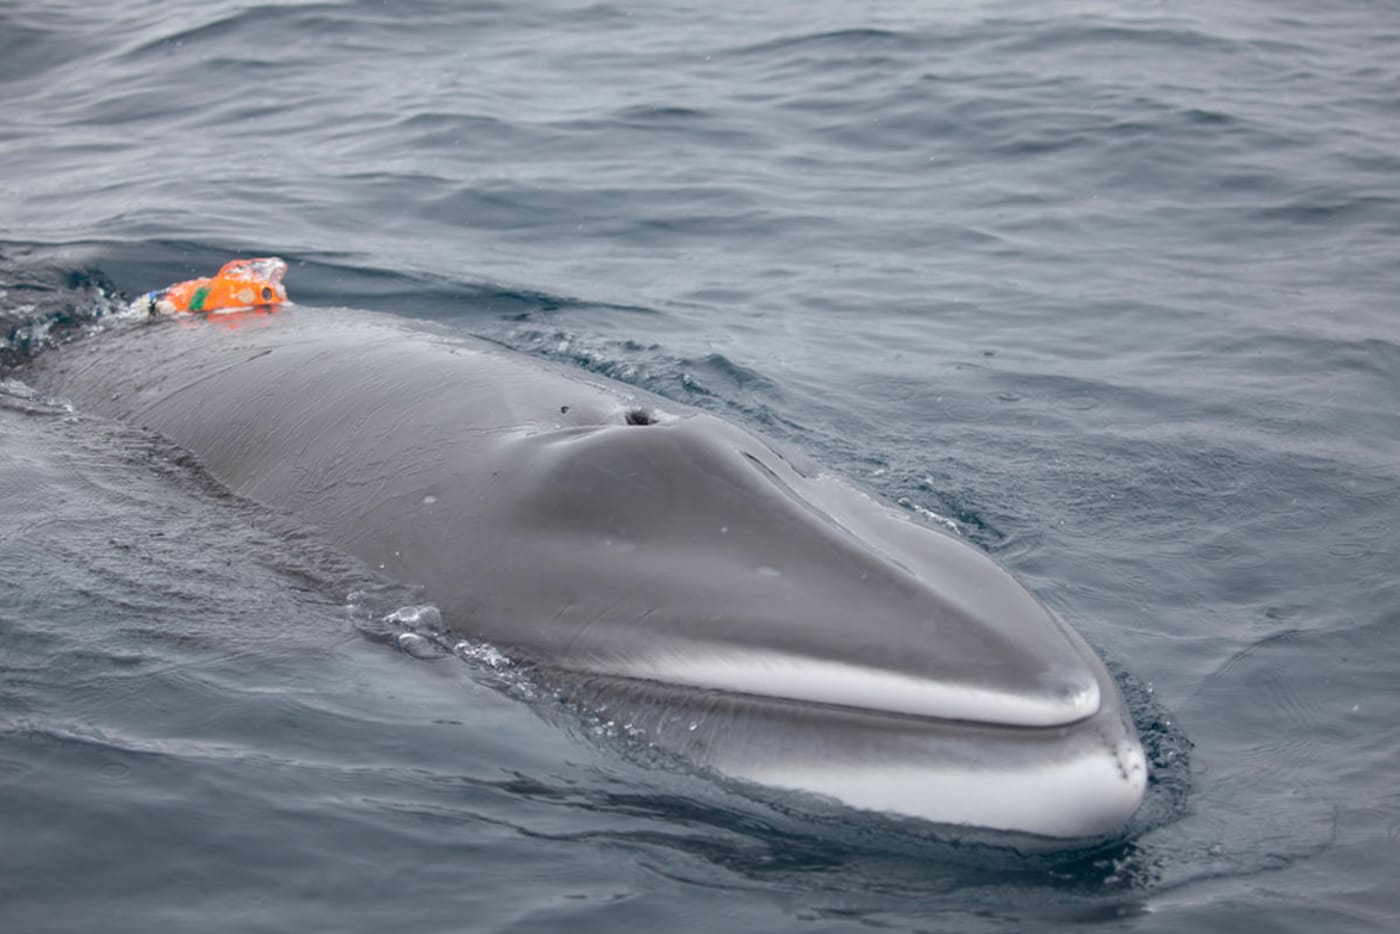 Antarctic minke whale (Balaenoptera bonaerensis) with a 'whale cam' or a CATS suction cup video tag, Antarctic Peninsula.